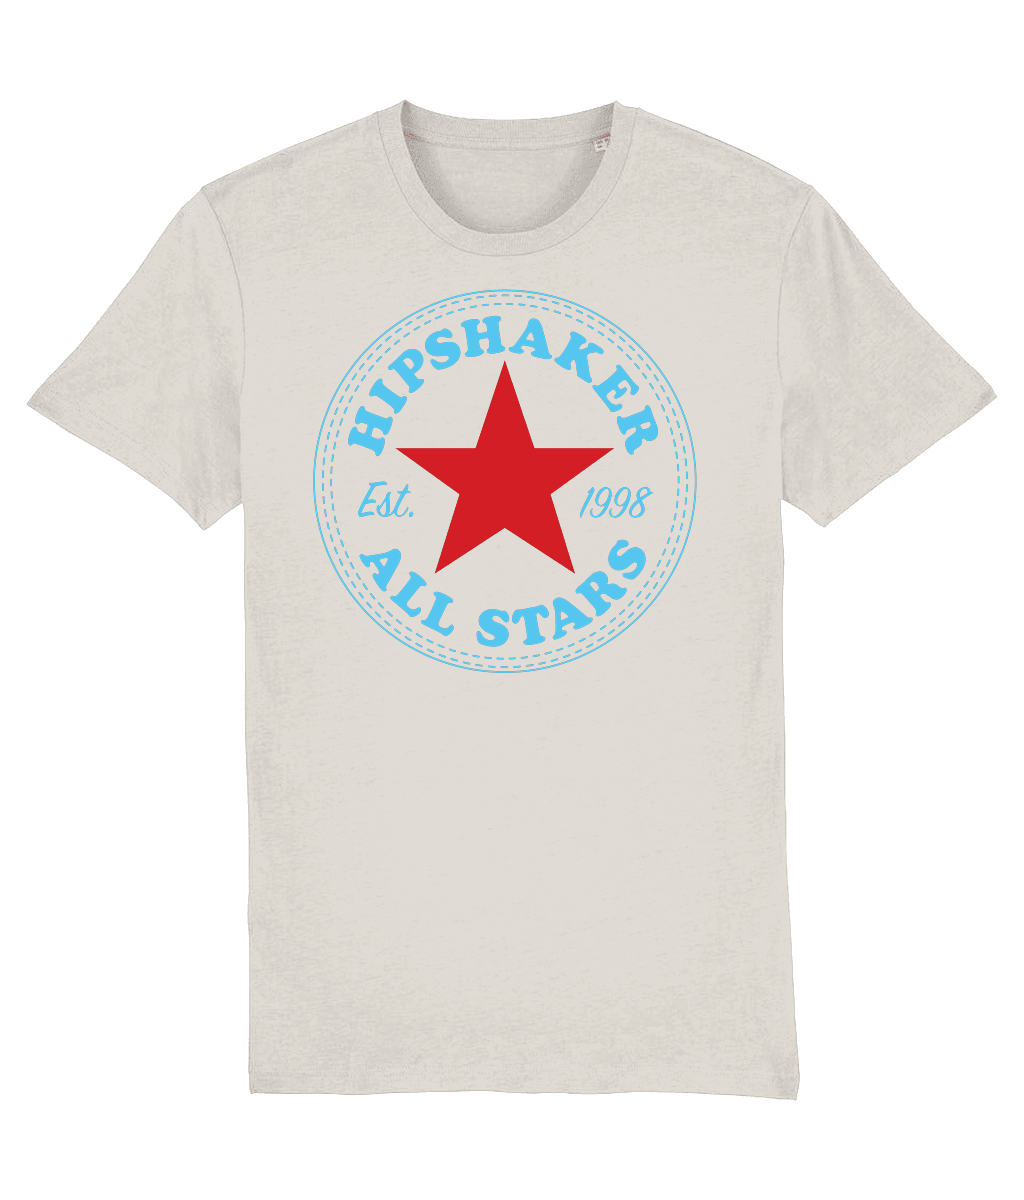 HIPSHAKER ALL STARS RED: T-Shirt Official Merchandise of Hipshaker (3 Colour Options) - SOUND IS COLOUR